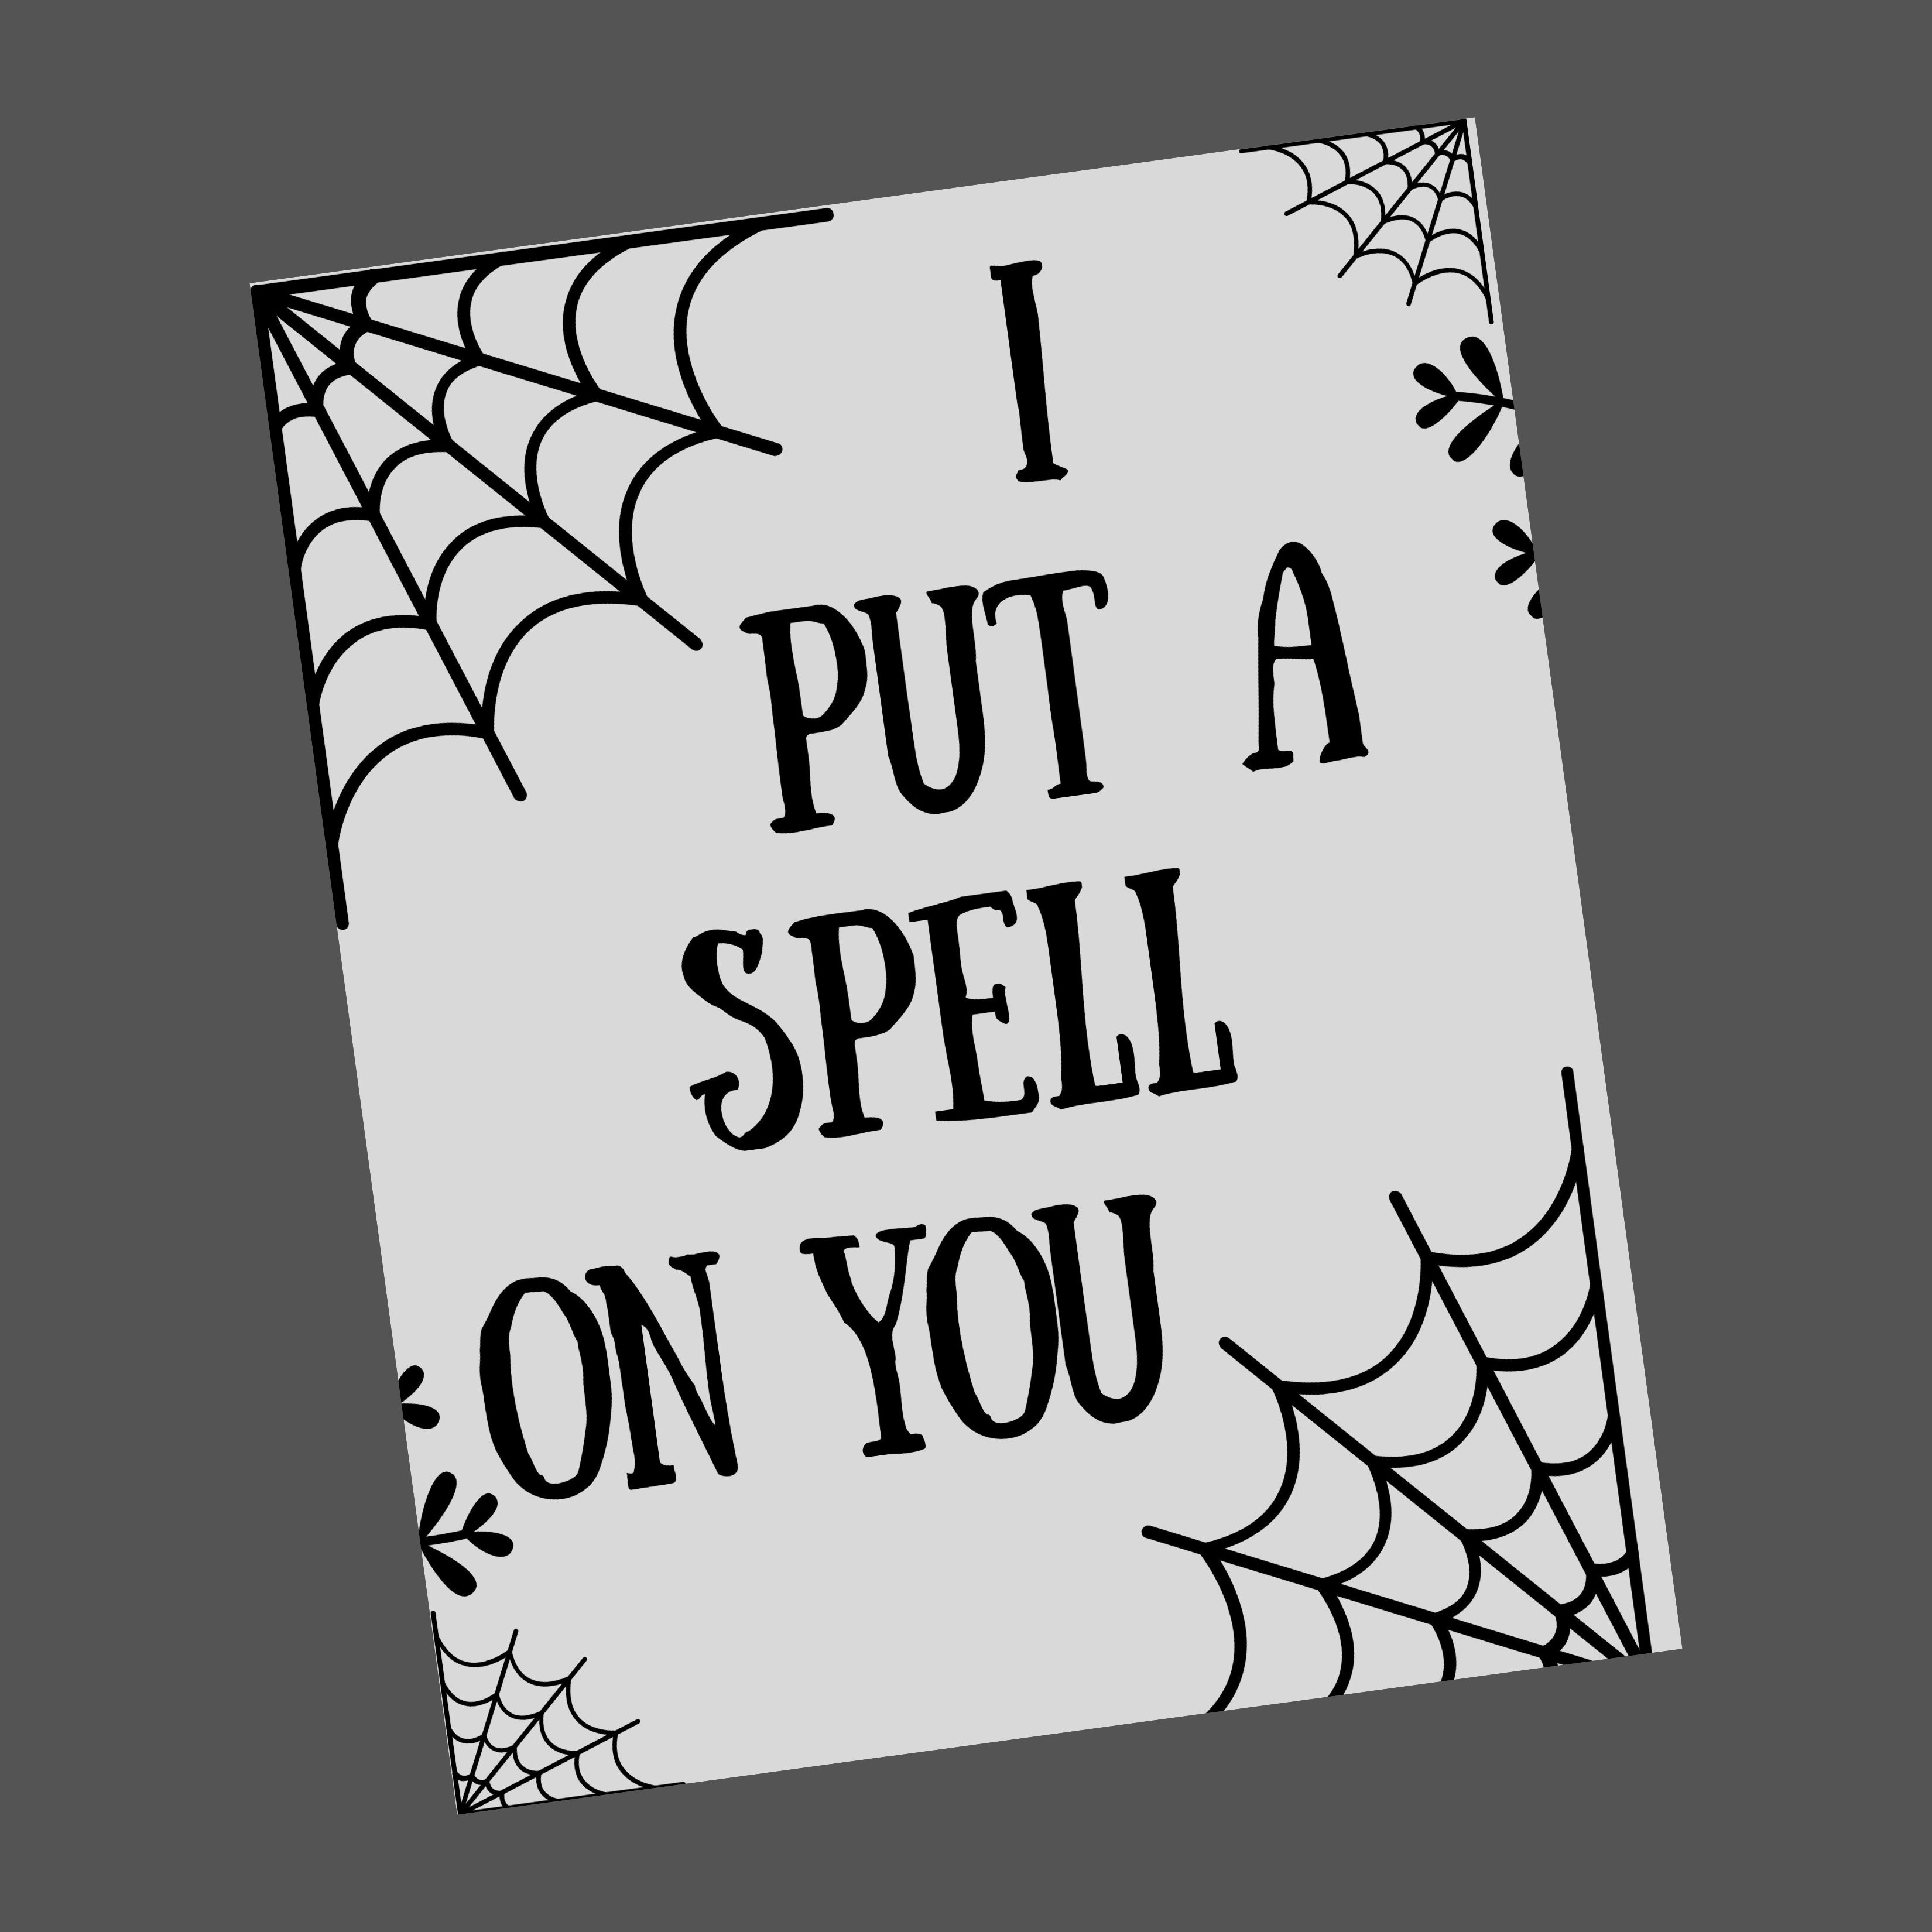 A black and white halloween printable with spider webs and says "I put a spell on you"